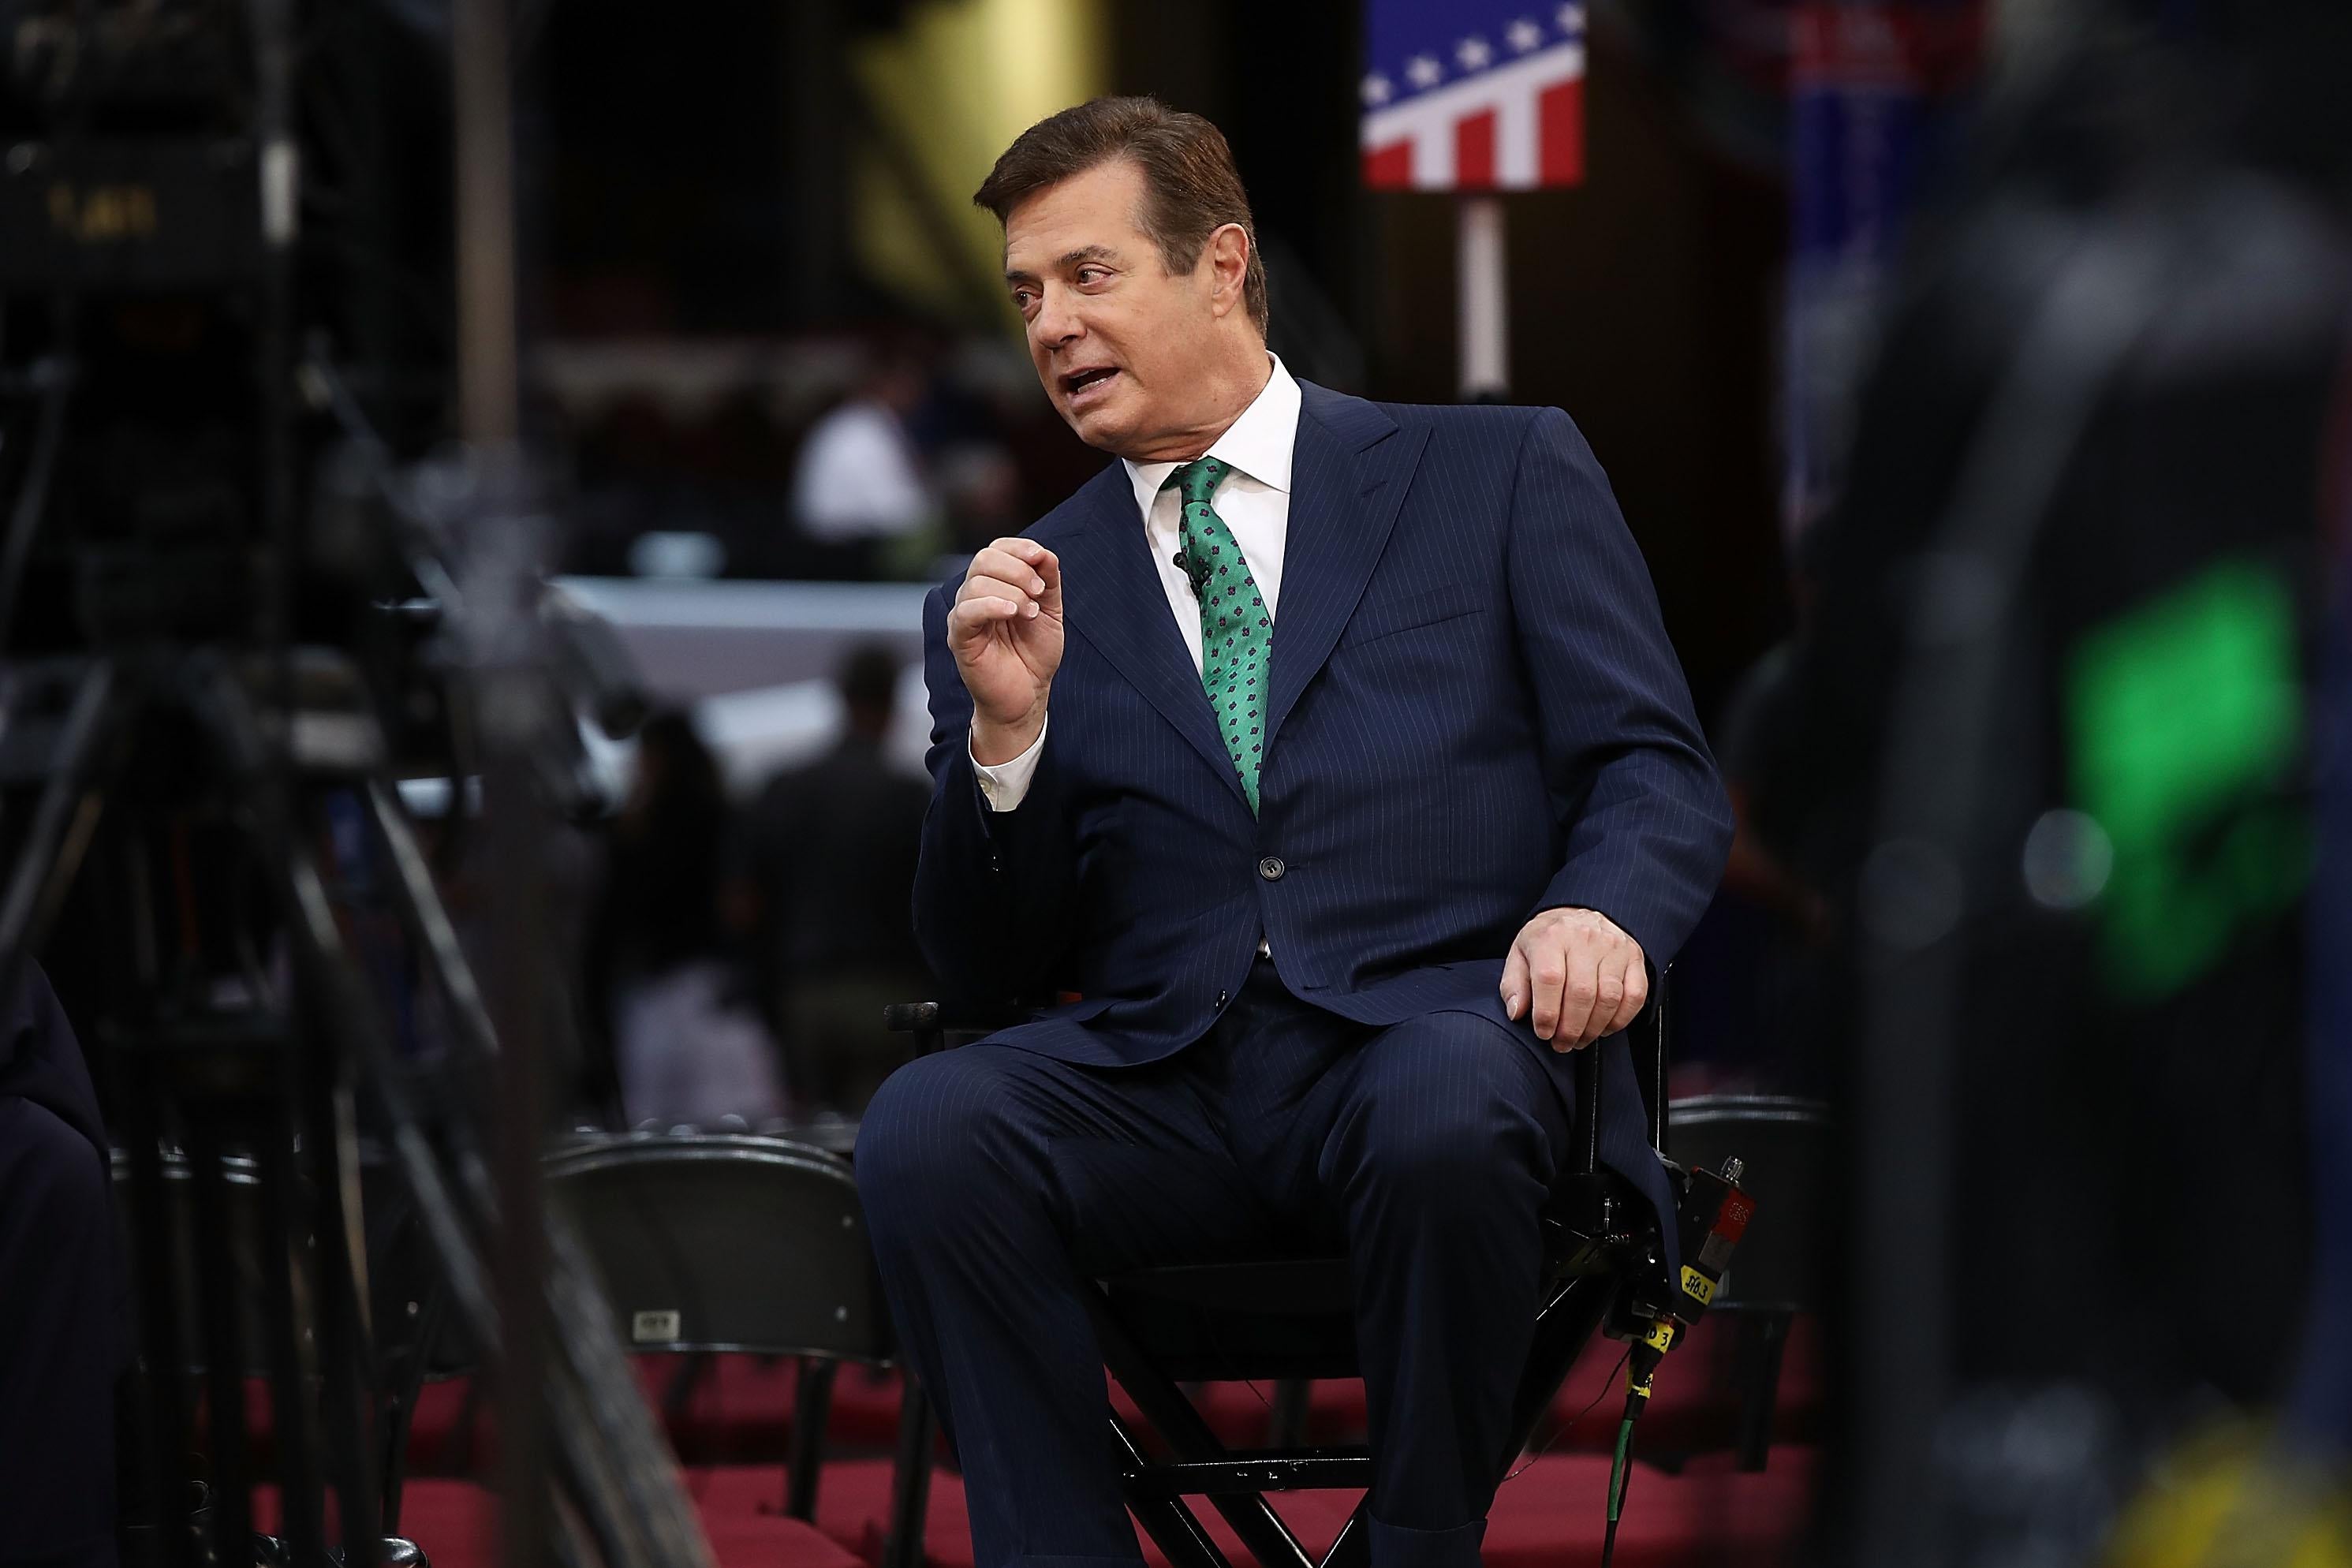 Paul Manafort, then-campaign manager for Donald Trump, on the floor of the Republican National Convention July 17, 2016 in Cleveland, Ohio. 